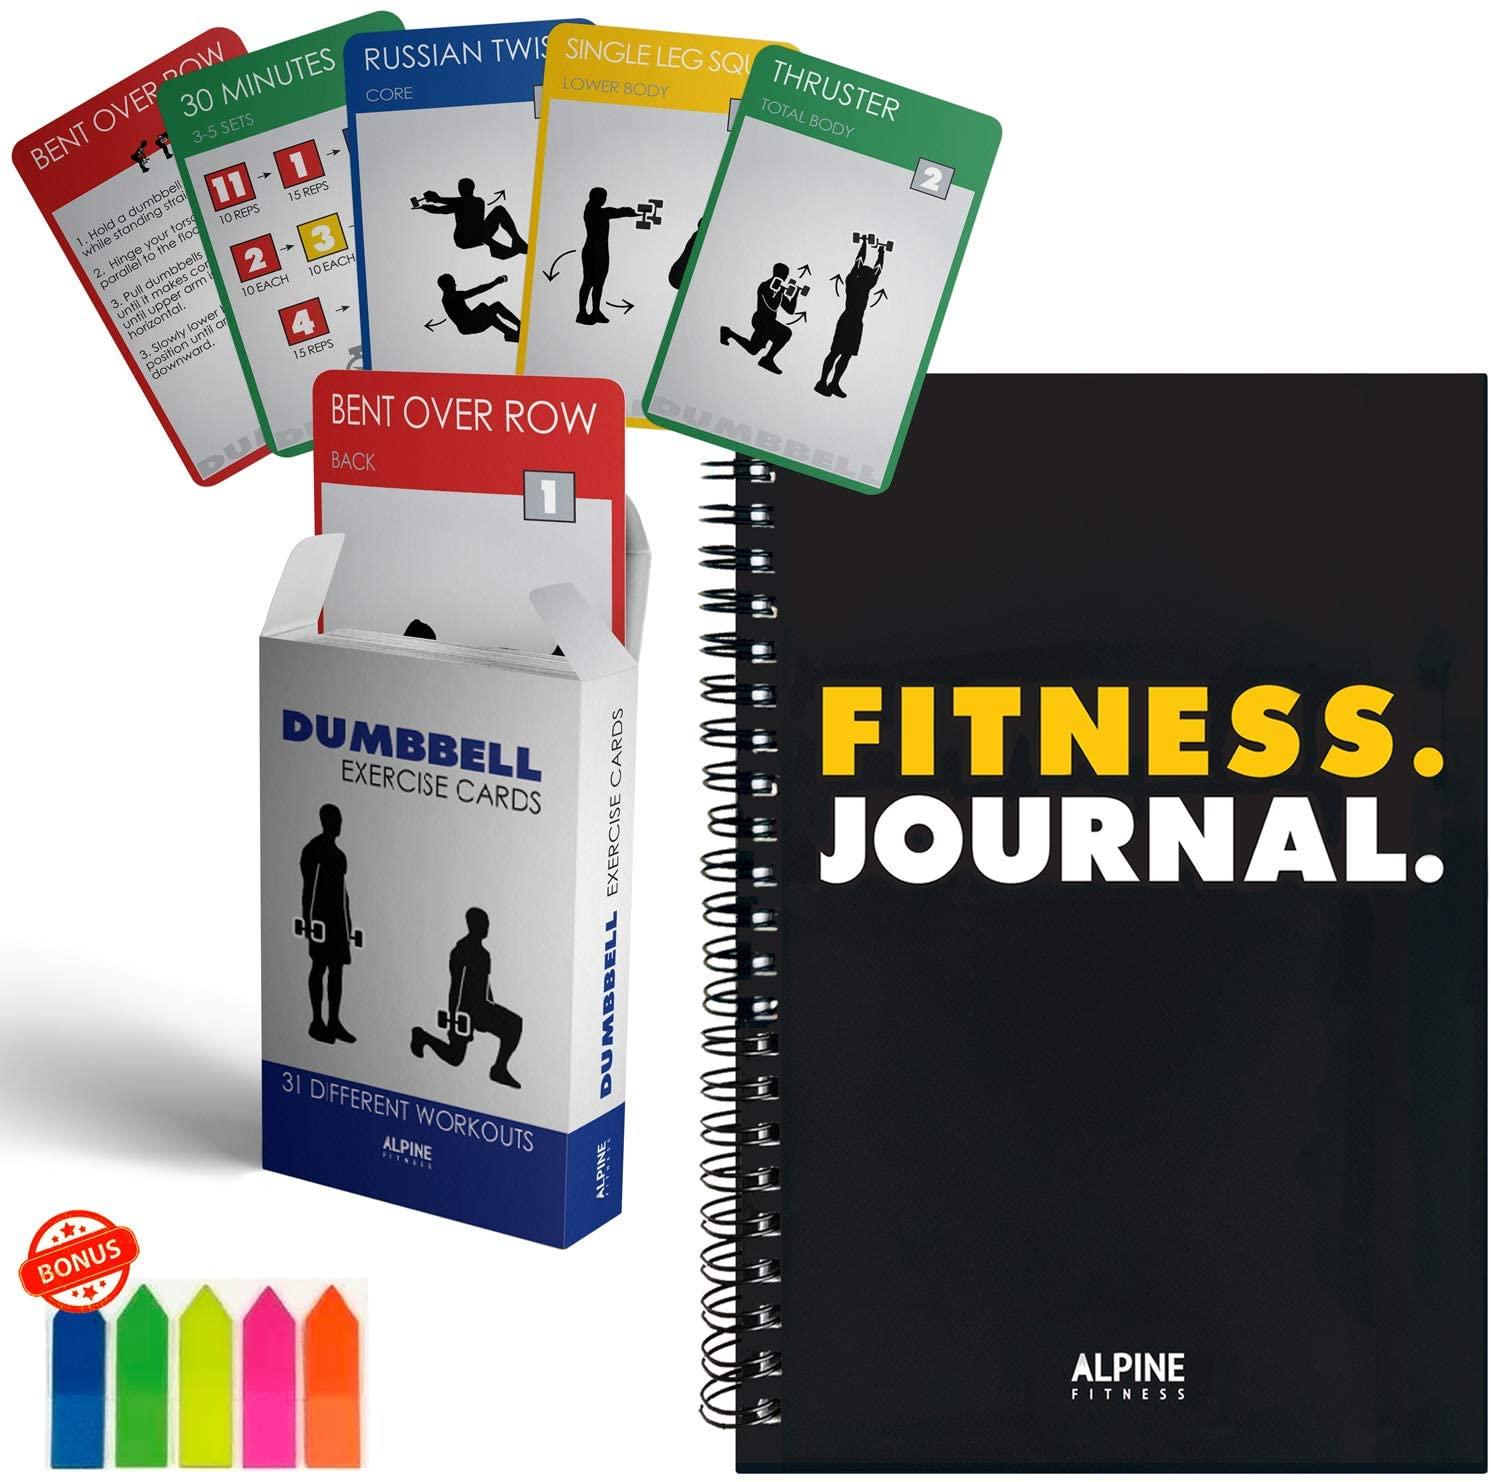 Workout Planner for Women Workout Journal for Women /& Men Workout Log Book//Fitness Journal//Workout Notebook. The Dumbbell Home Workout Journal 13-Week Program Fitness Planner//Workout Book